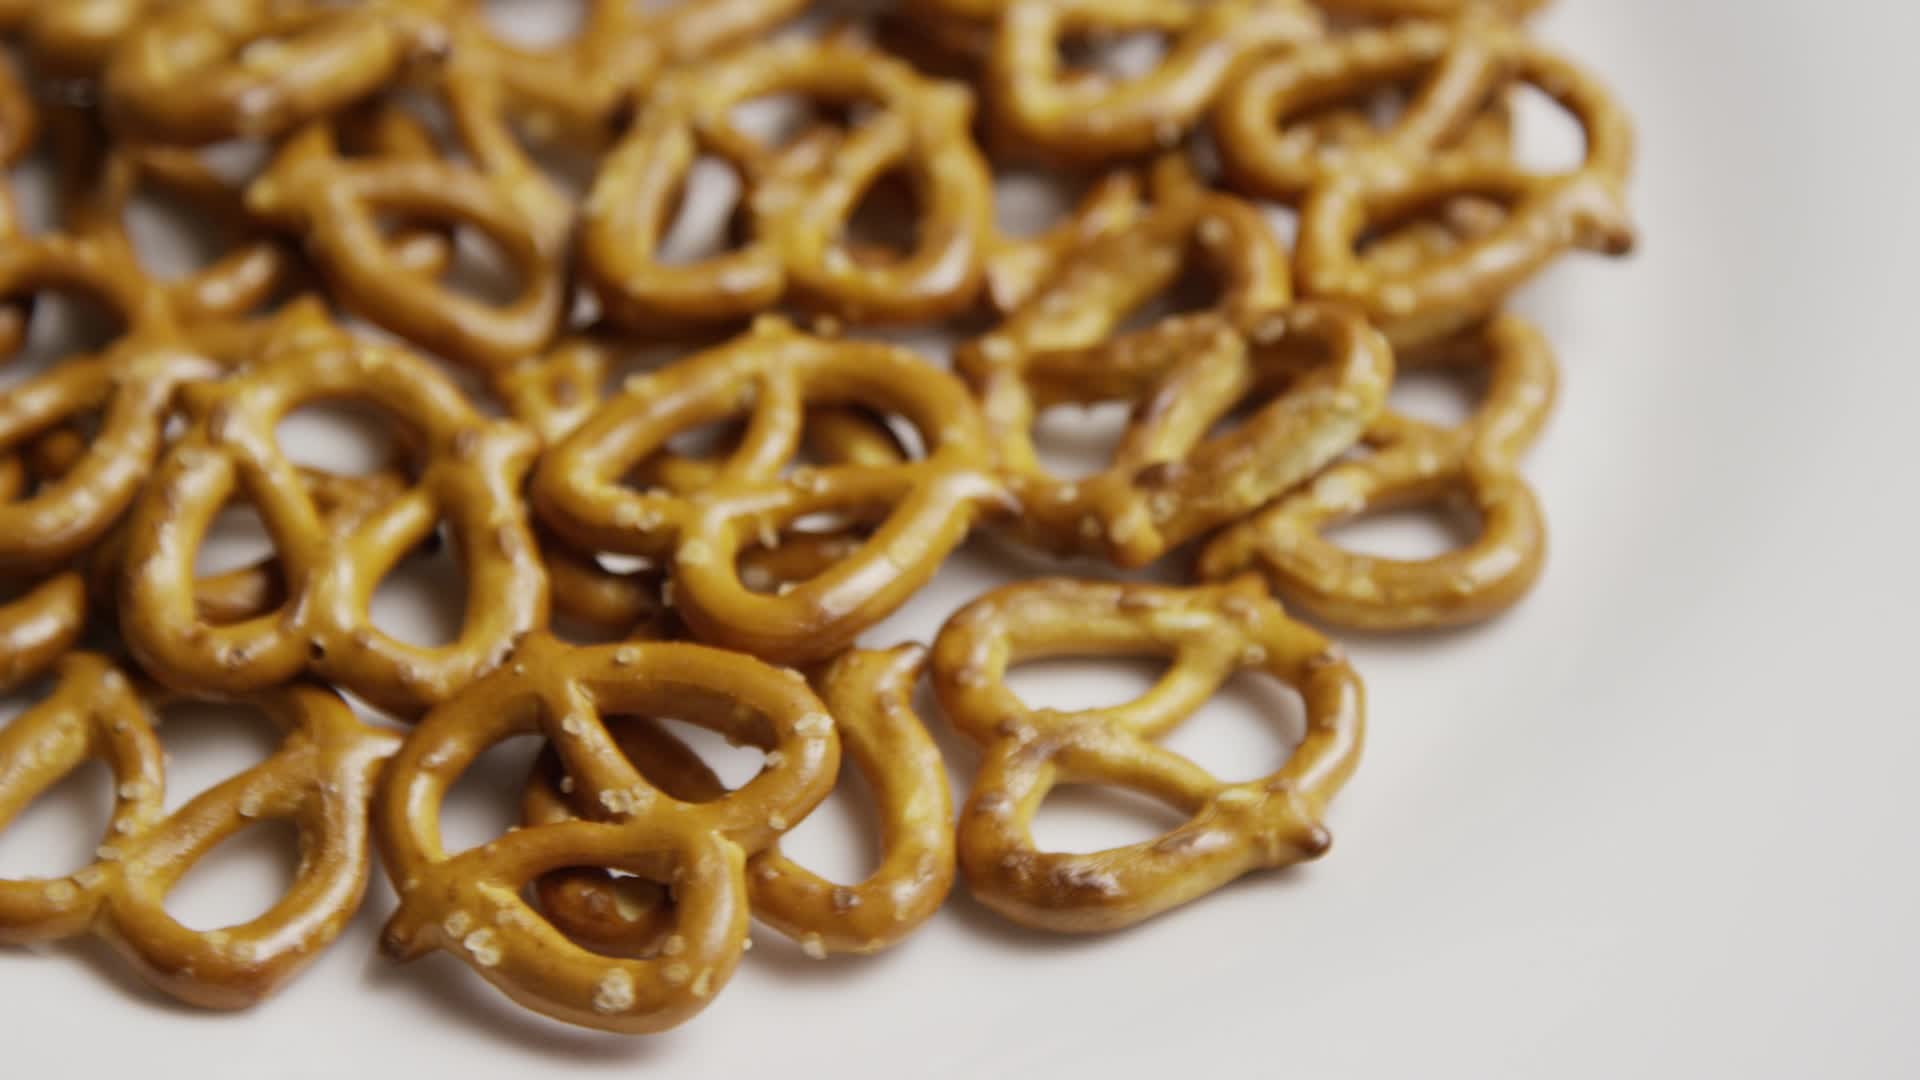 Rotating pretzels, White plate, Delicious appetizer, Stock video footage, 1920x1080 Full HD Desktop